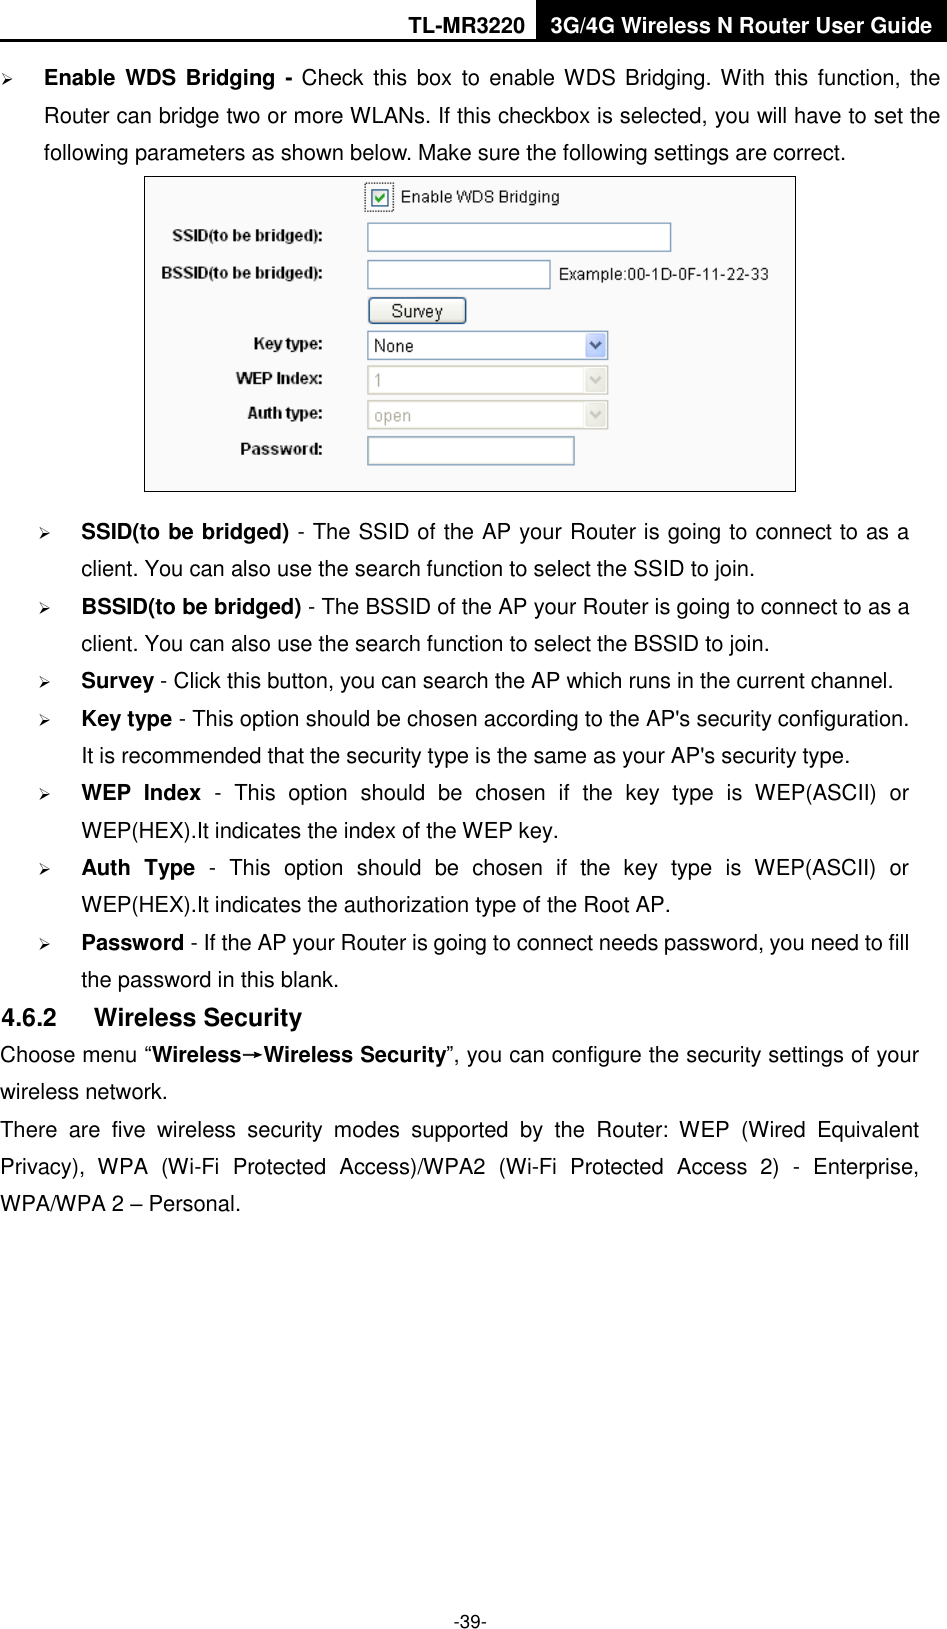 TL-MR3220 3G/4G Wireless N Router User Guide  -39-  Enable WDS Bridging - Check  this box  to enable WDS Bridging. With  this function, the Router can bridge two or more WLANs. If this checkbox is selected, you will have to set the following parameters as shown below. Make sure the following settings are correct.   SSID(to be bridged) - The SSID of the AP your Router is going to connect to as a client. You can also use the search function to select the SSID to join.  BSSID(to be bridged) - The BSSID of the AP your Router is going to connect to as a client. You can also use the search function to select the BSSID to join.  Survey - Click this button, you can search the AP which runs in the current channel.  Key type - This option should be chosen according to the AP&apos;s security configuration. It is recommended that the security type is the same as your AP&apos;s security type.  WEP  Index  -  This  option  should  be  chosen  if  the  key  type  is  WEP(ASCII)  or WEP(HEX).It indicates the index of the WEP key.  Auth  Type  -  This  option  should  be  chosen  if  the  key  type  is  WEP(ASCII)  or WEP(HEX).It indicates the authorization type of the Root AP.  Password - If the AP your Router is going to connect needs password, you need to fill the password in this blank. 4.6.2  Wireless Security Choose menu “Wireless→Wireless Security”, you can configure the security settings of your wireless network. There  are  five  wireless  security  modes  supported  by  the  Router:  WEP  (Wired  Equivalent Privacy),  WPA  (Wi-Fi  Protected  Access)/WPA2  (Wi-Fi  Protected  Access  2)  -  Enterprise, WPA/WPA 2 – Personal. 